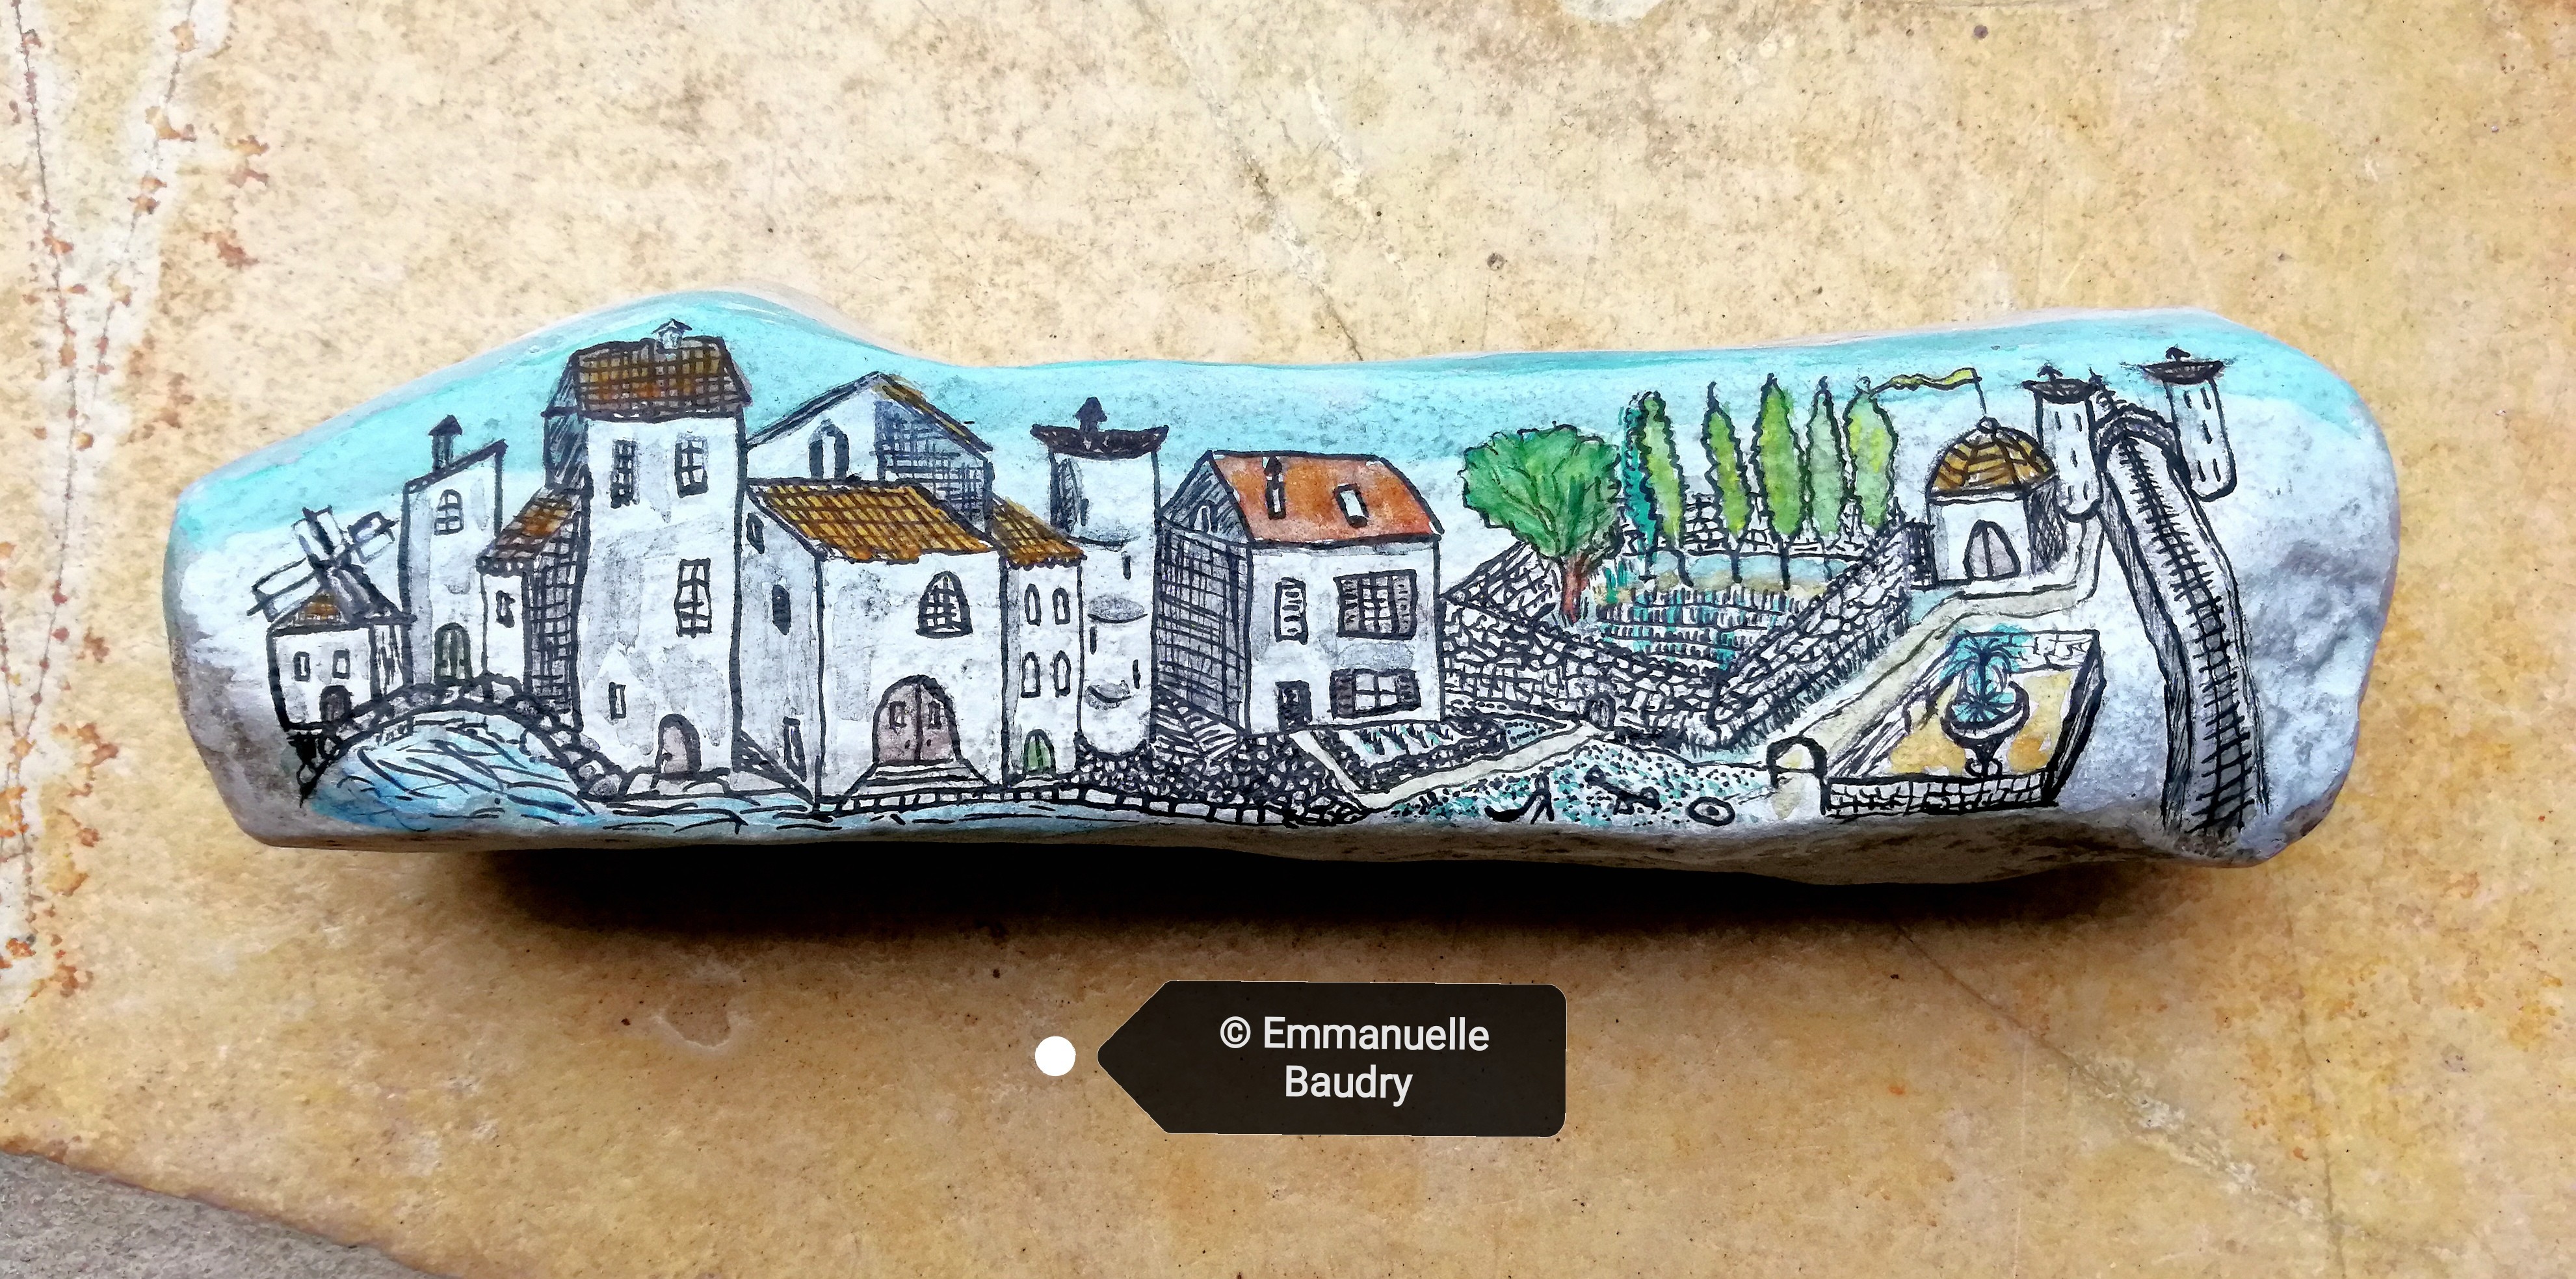 A little bit of Provence, mixed media drawing on Garrigues's stone by Emmanuelle Baudry